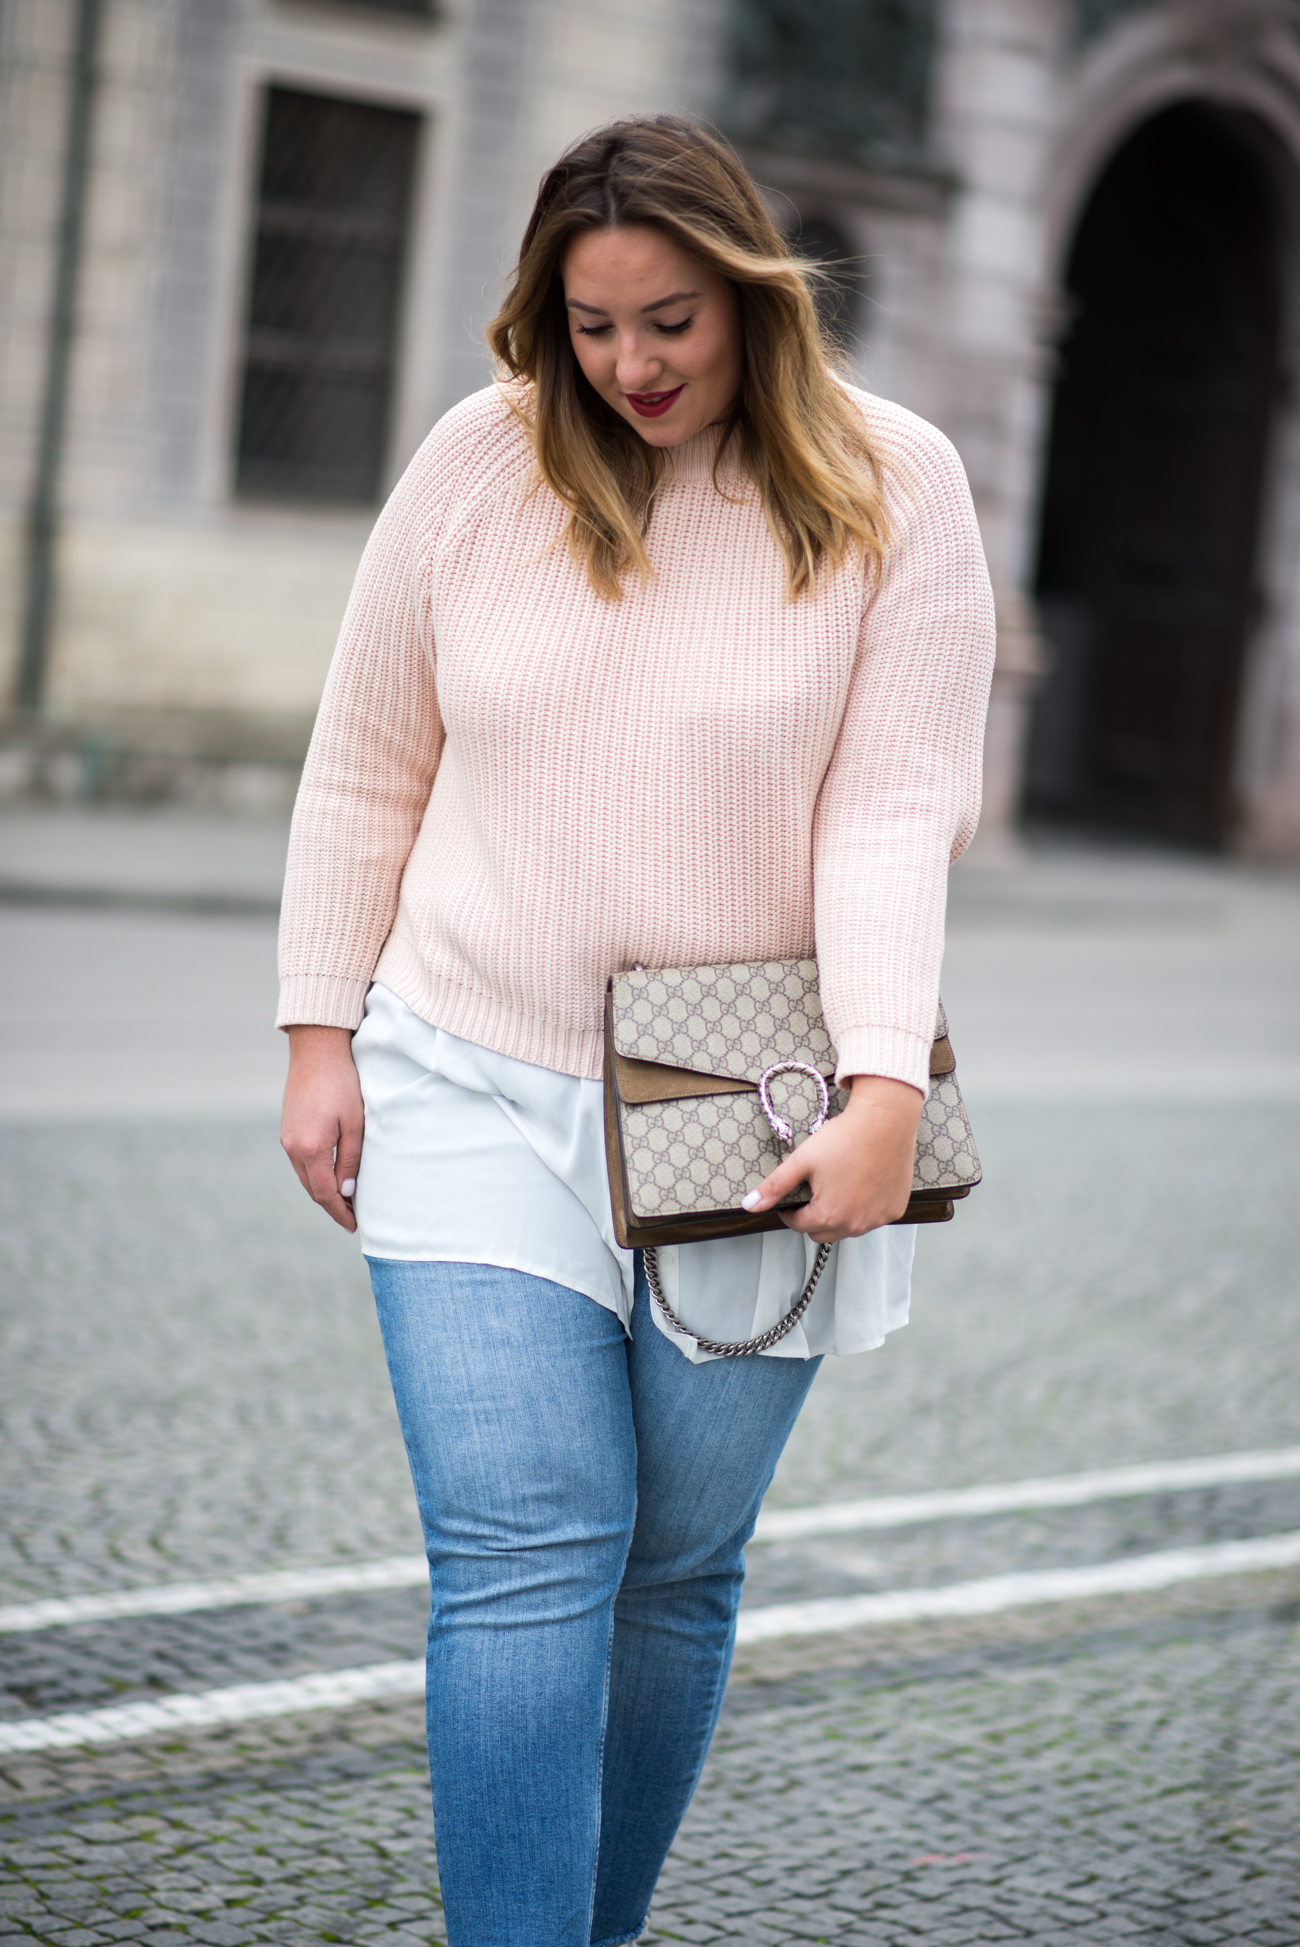 the-skinny-and-the-curvy-one_fashion_plussize_marina-rinaldi_chanel_jeans_blue-jeans_curve-outfit-inspo_muenchen-blogger_daily-outfit_plus-size-blog_plus-size-blogger-deutschland_-10-von-23